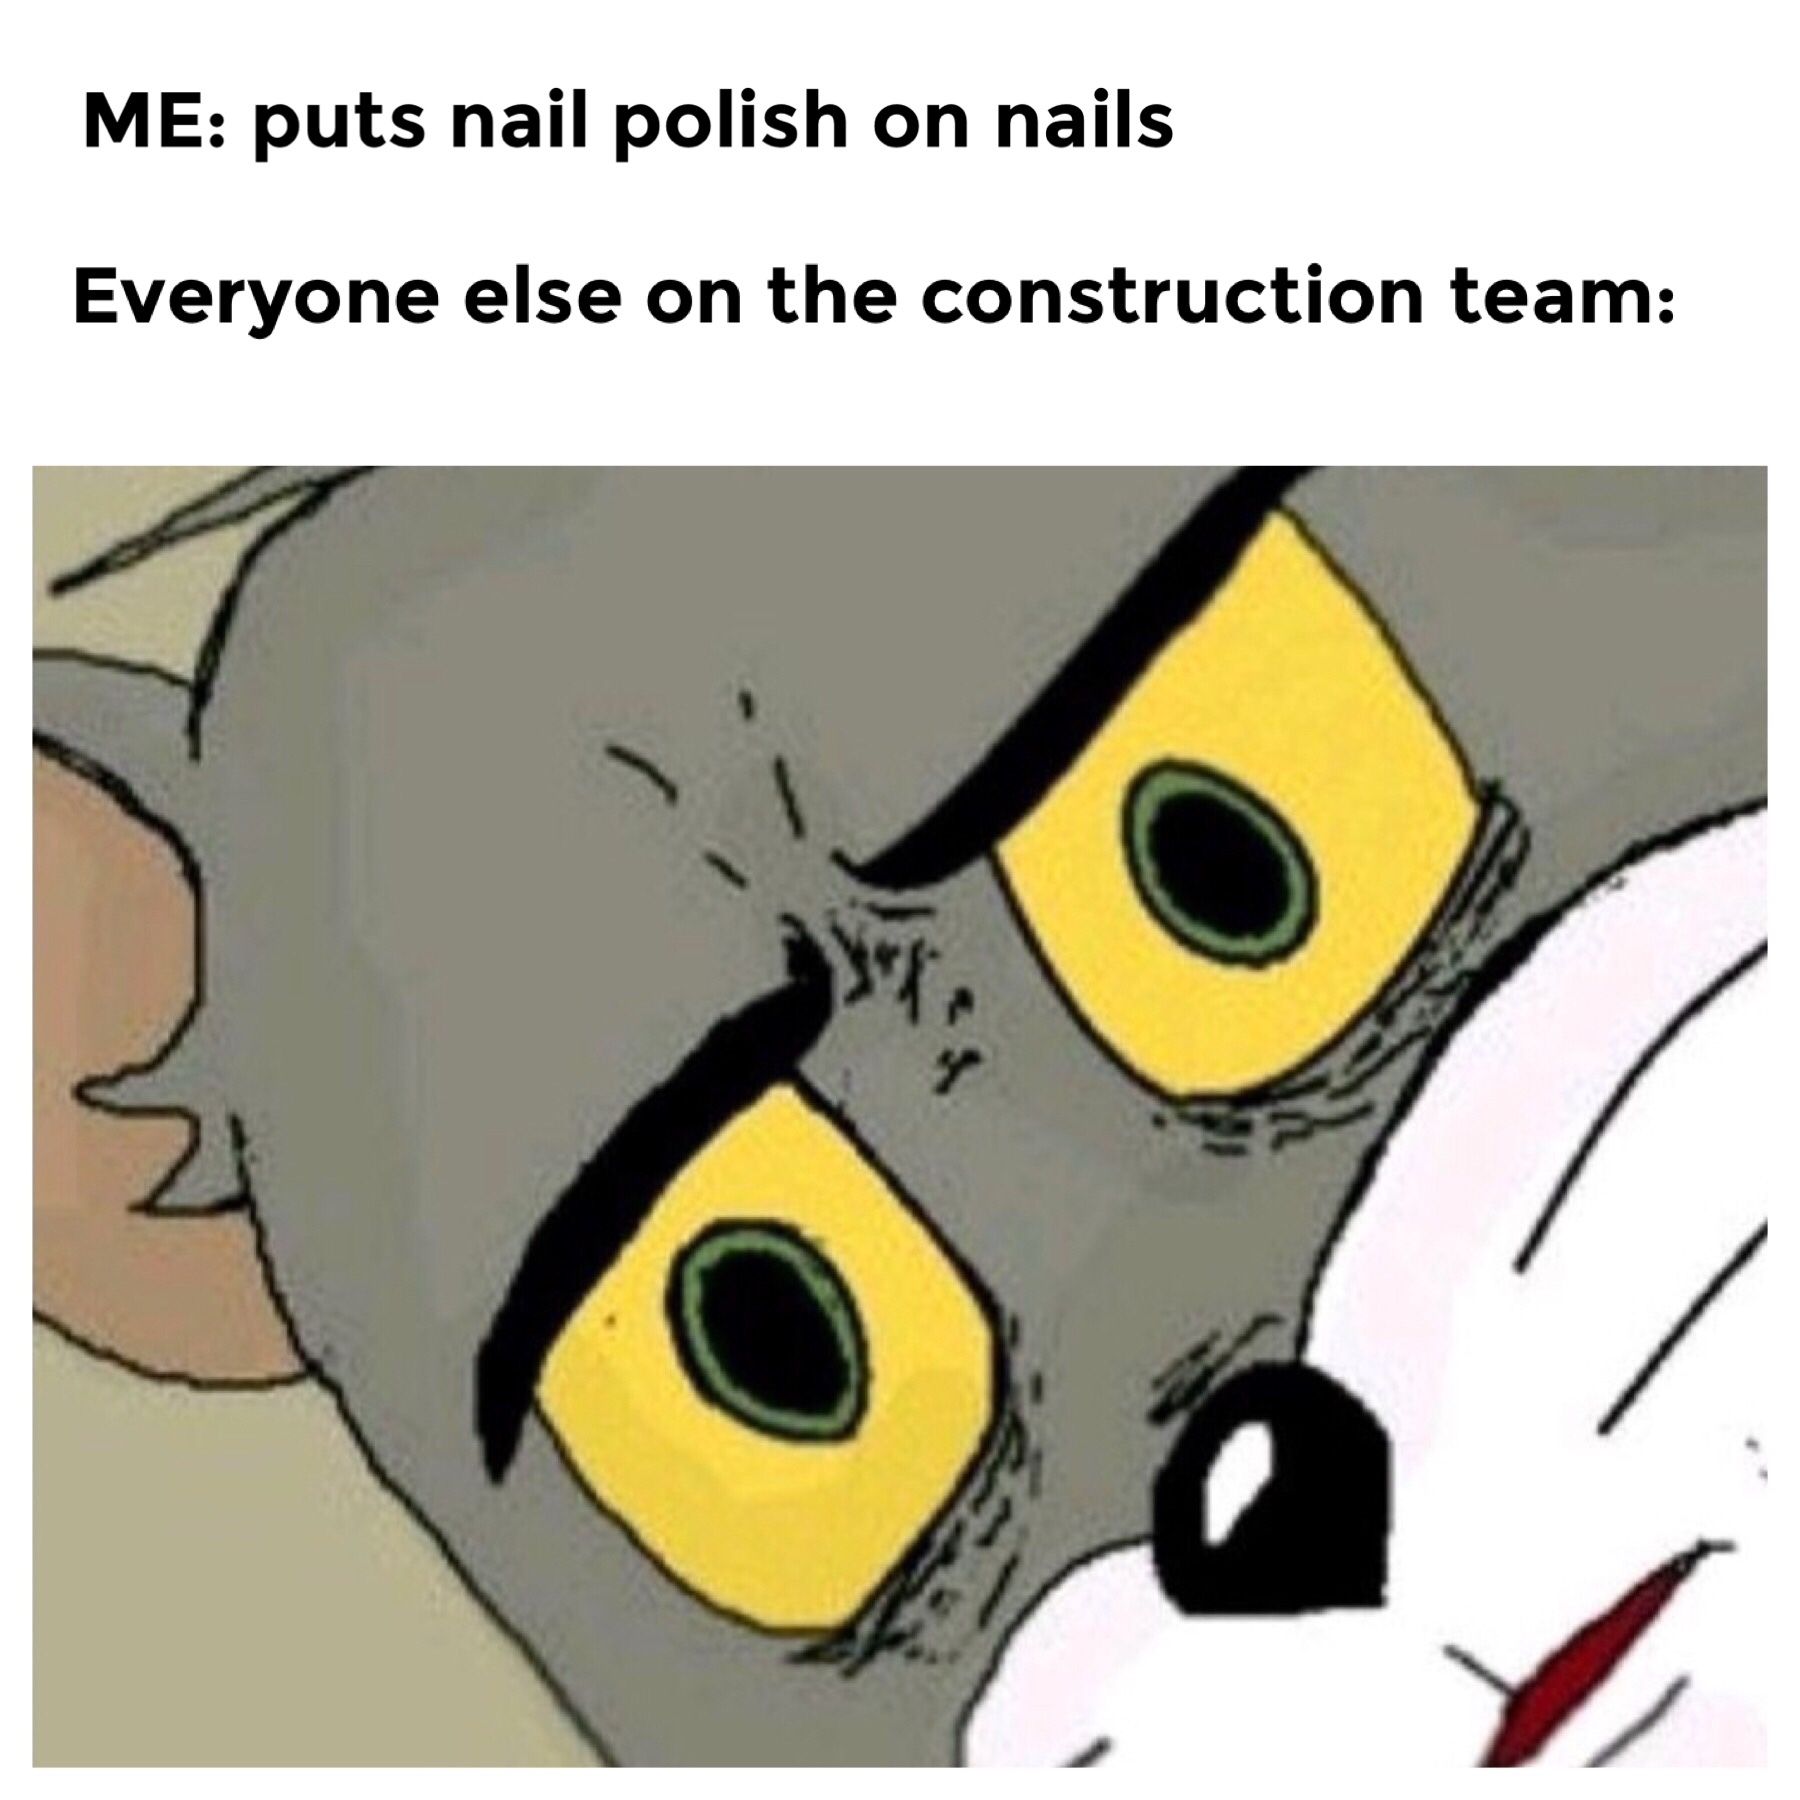 so that’s what nail polish is for! - meme